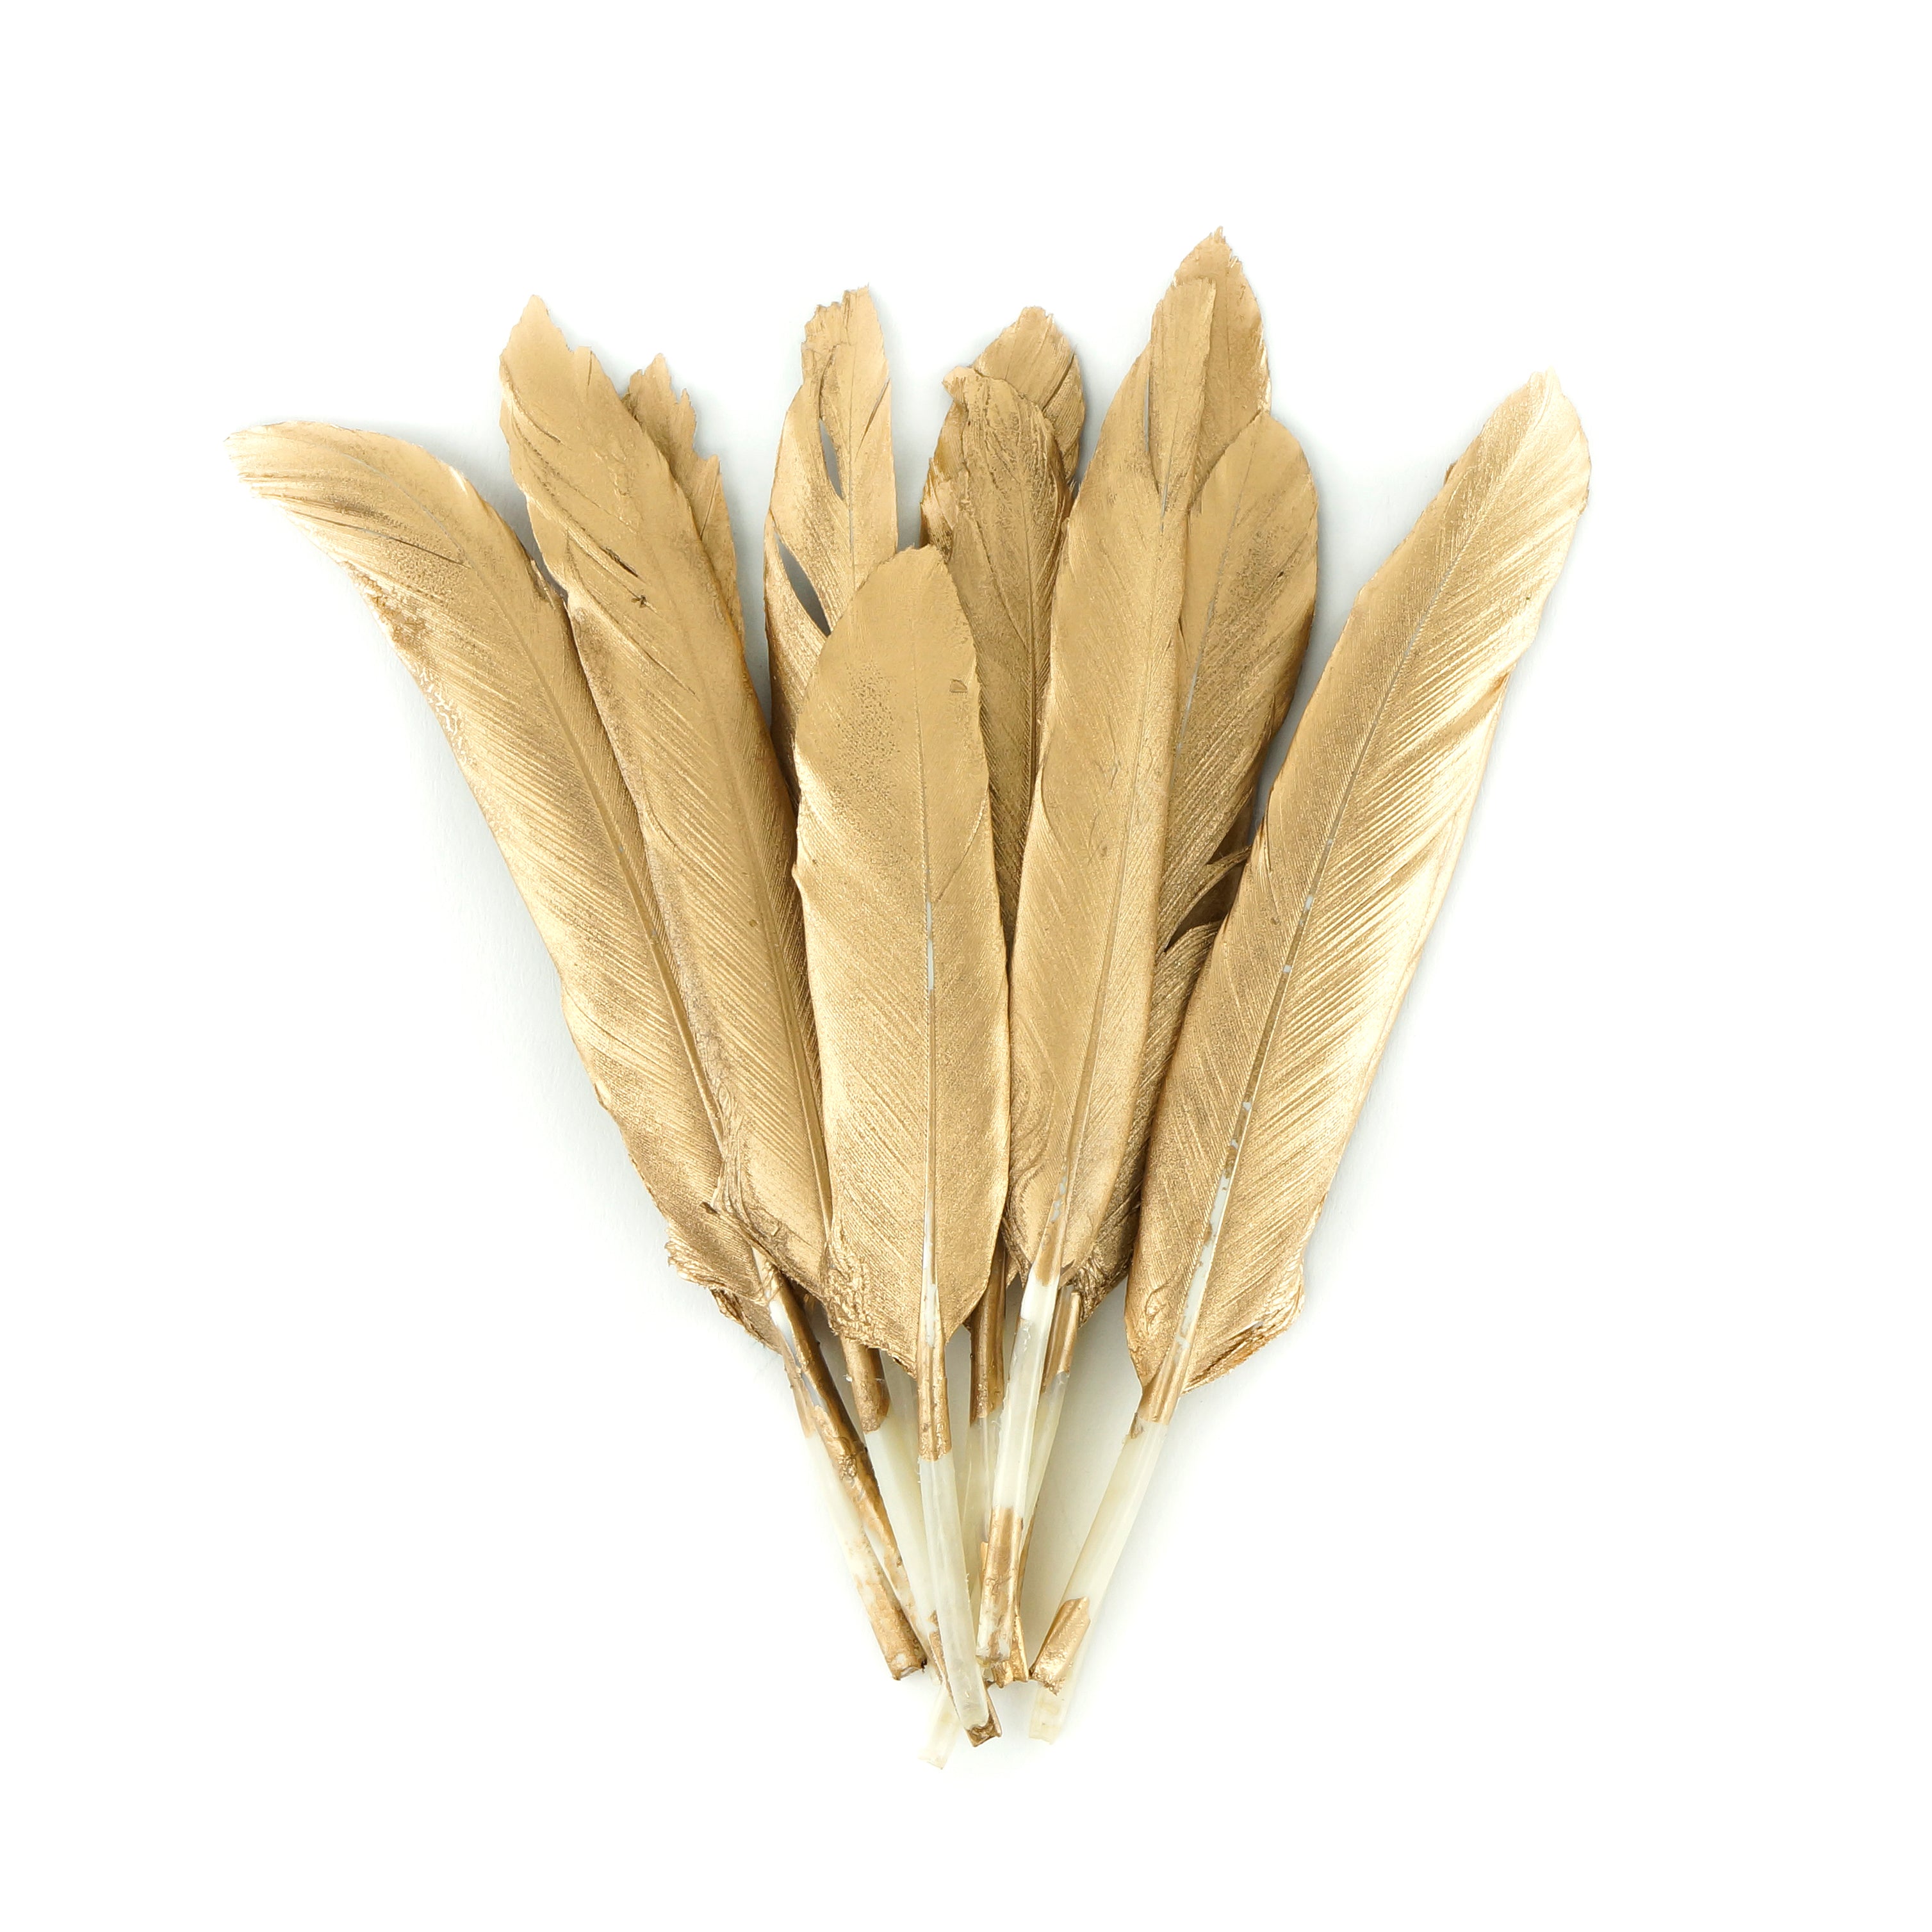 Black feather plume with gold streamers 6-10